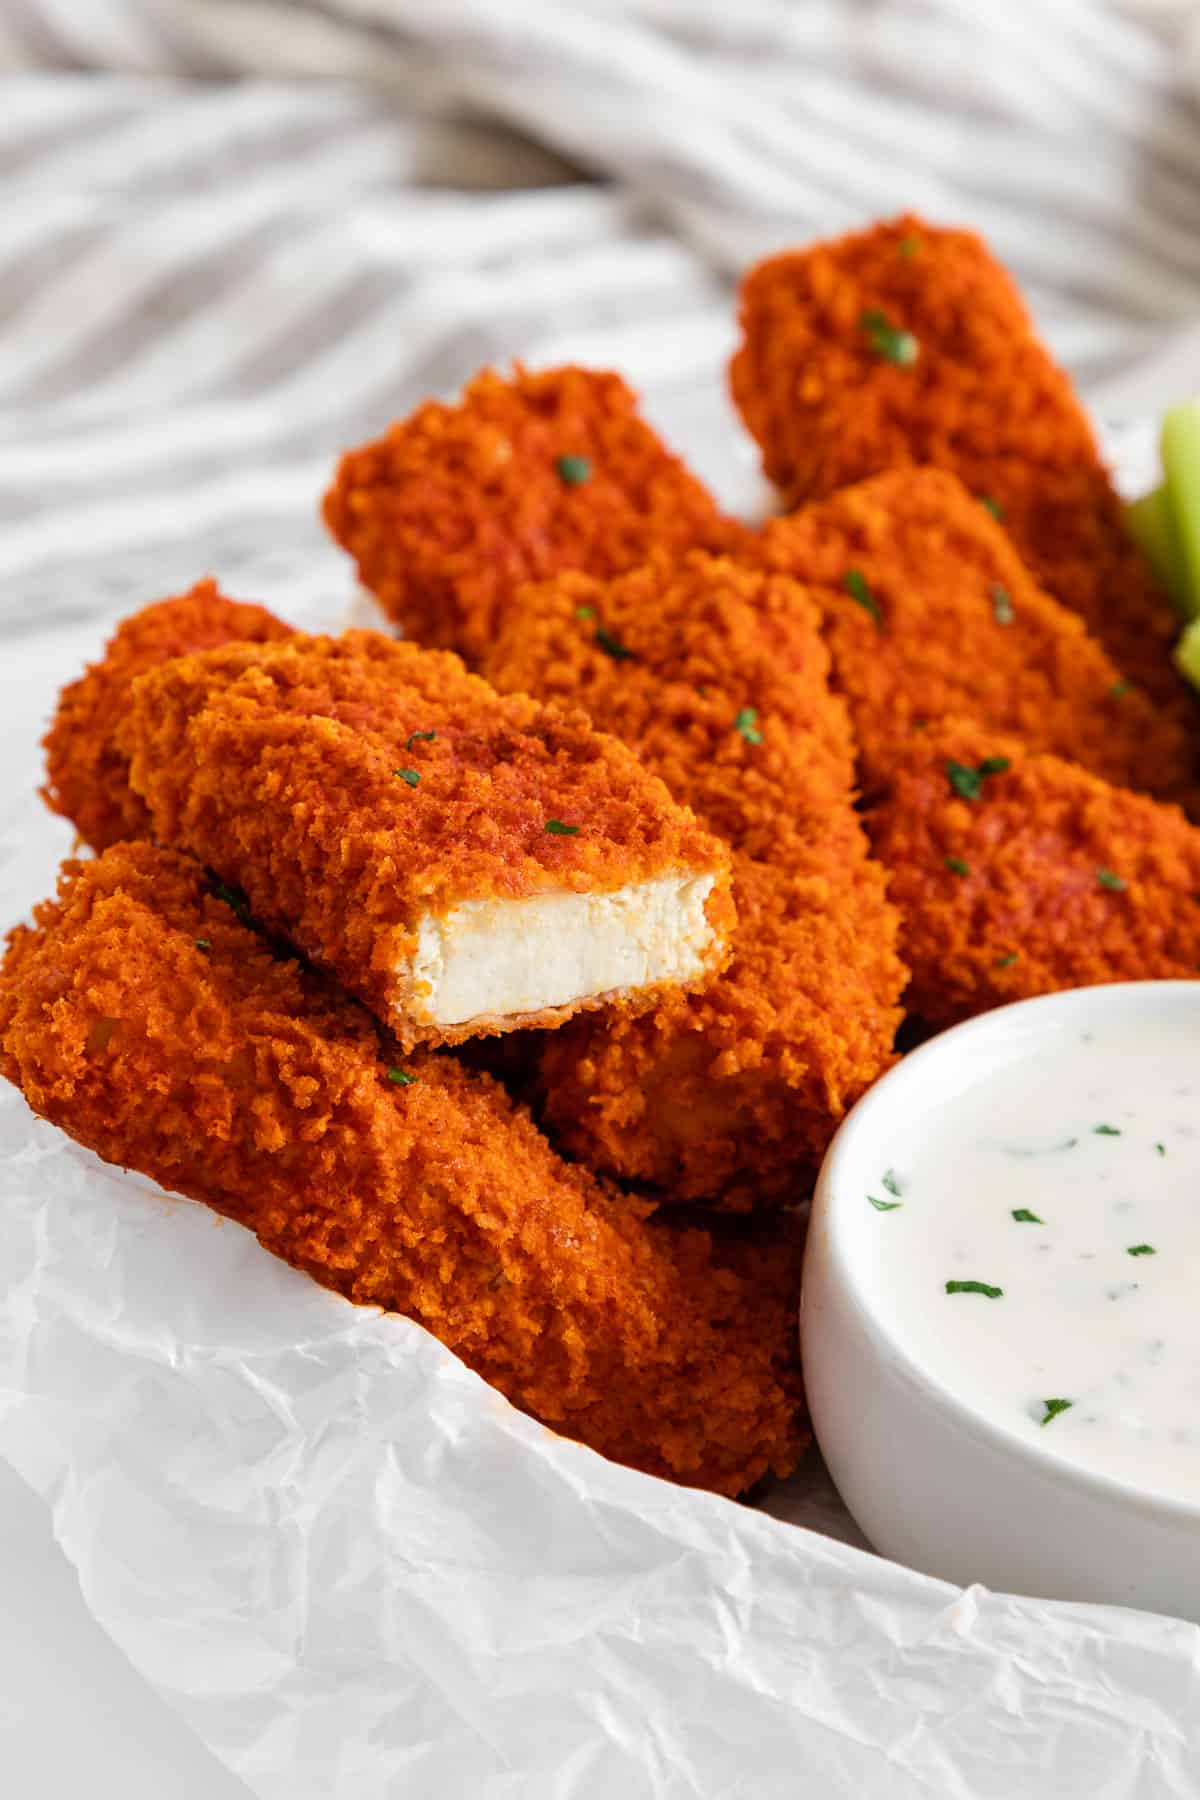 vegan buffalo tofu wings spread on a plate with a bite taken out of one of the wings